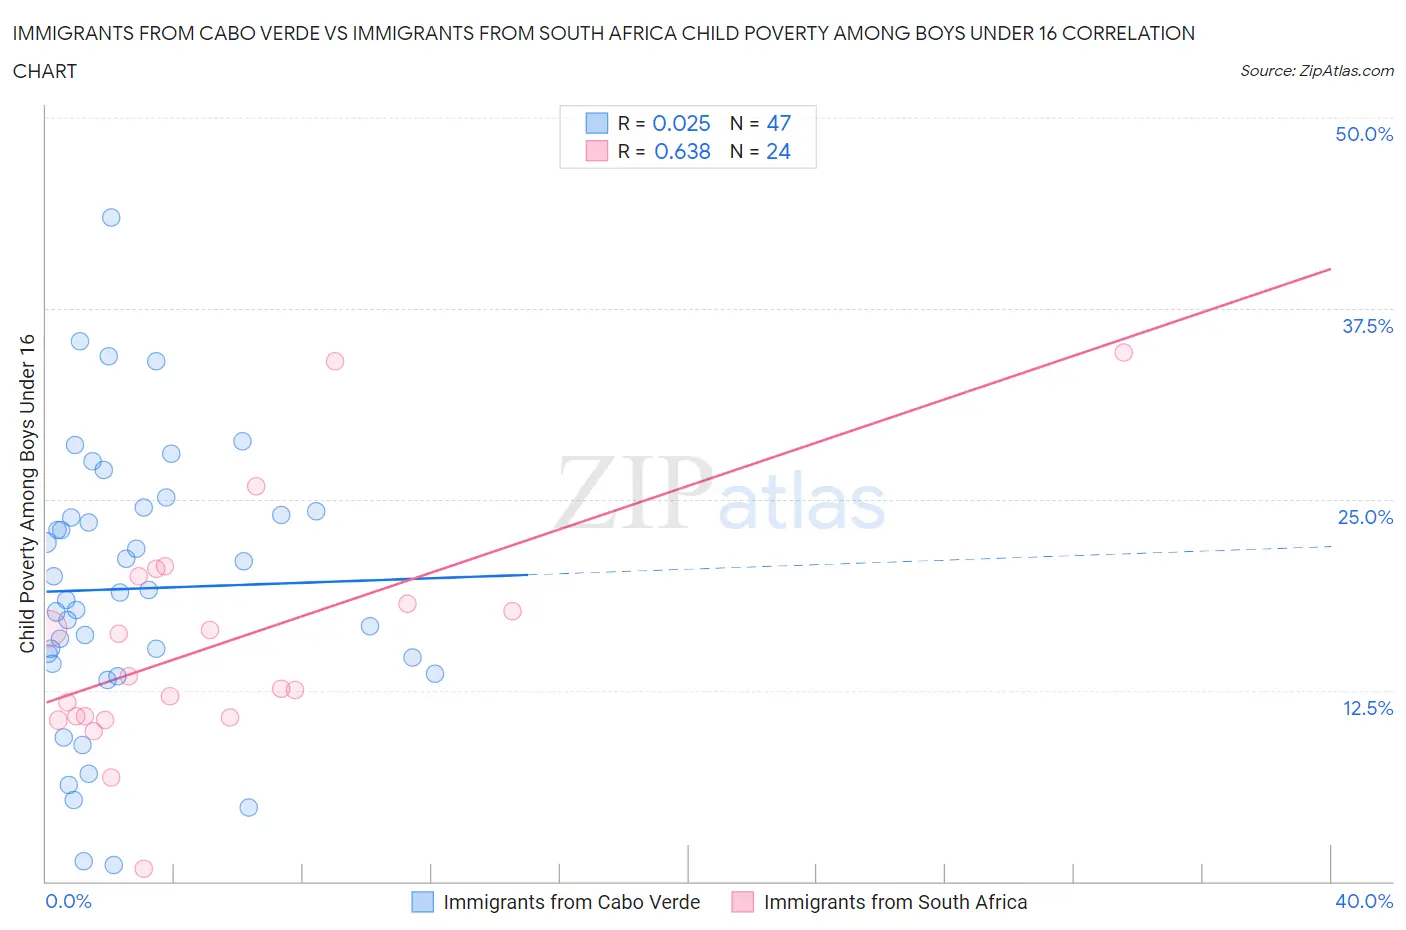 Immigrants from Cabo Verde vs Immigrants from South Africa Child Poverty Among Boys Under 16